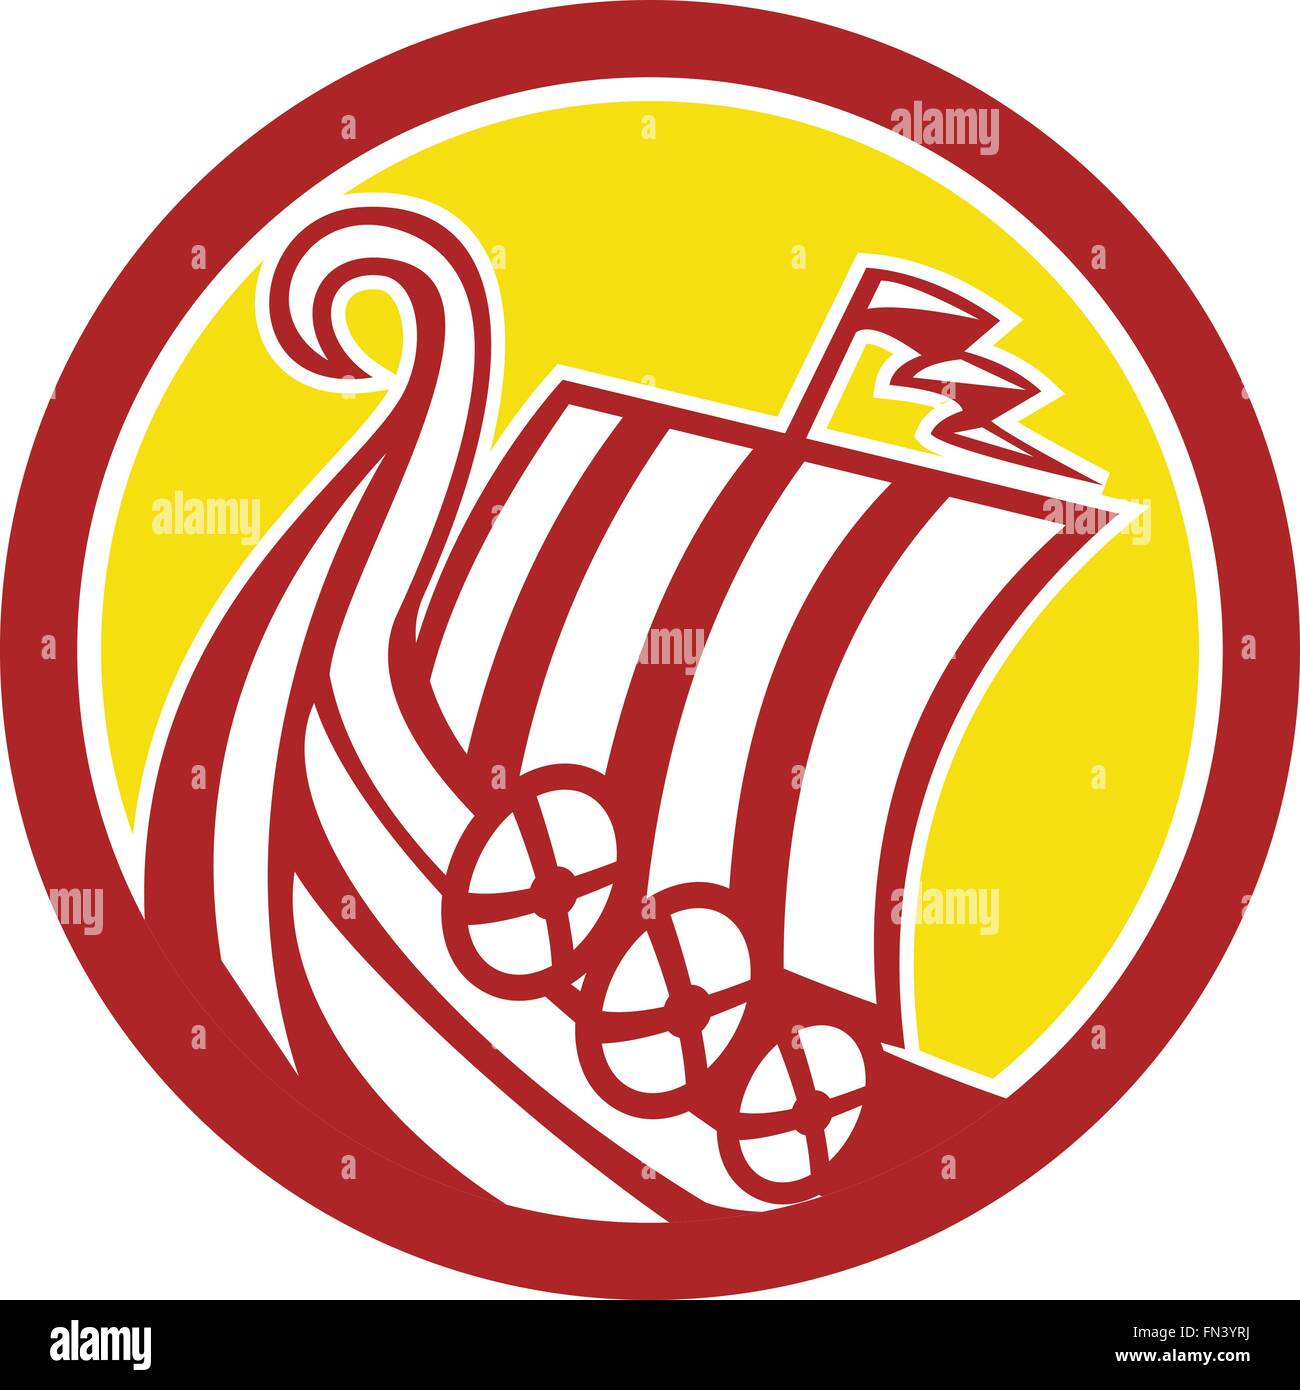 Illustration of medieval Viking ship longboat sailboat with shield viewed from the side set inside circle done in retro style on isolated background. Stock Vector